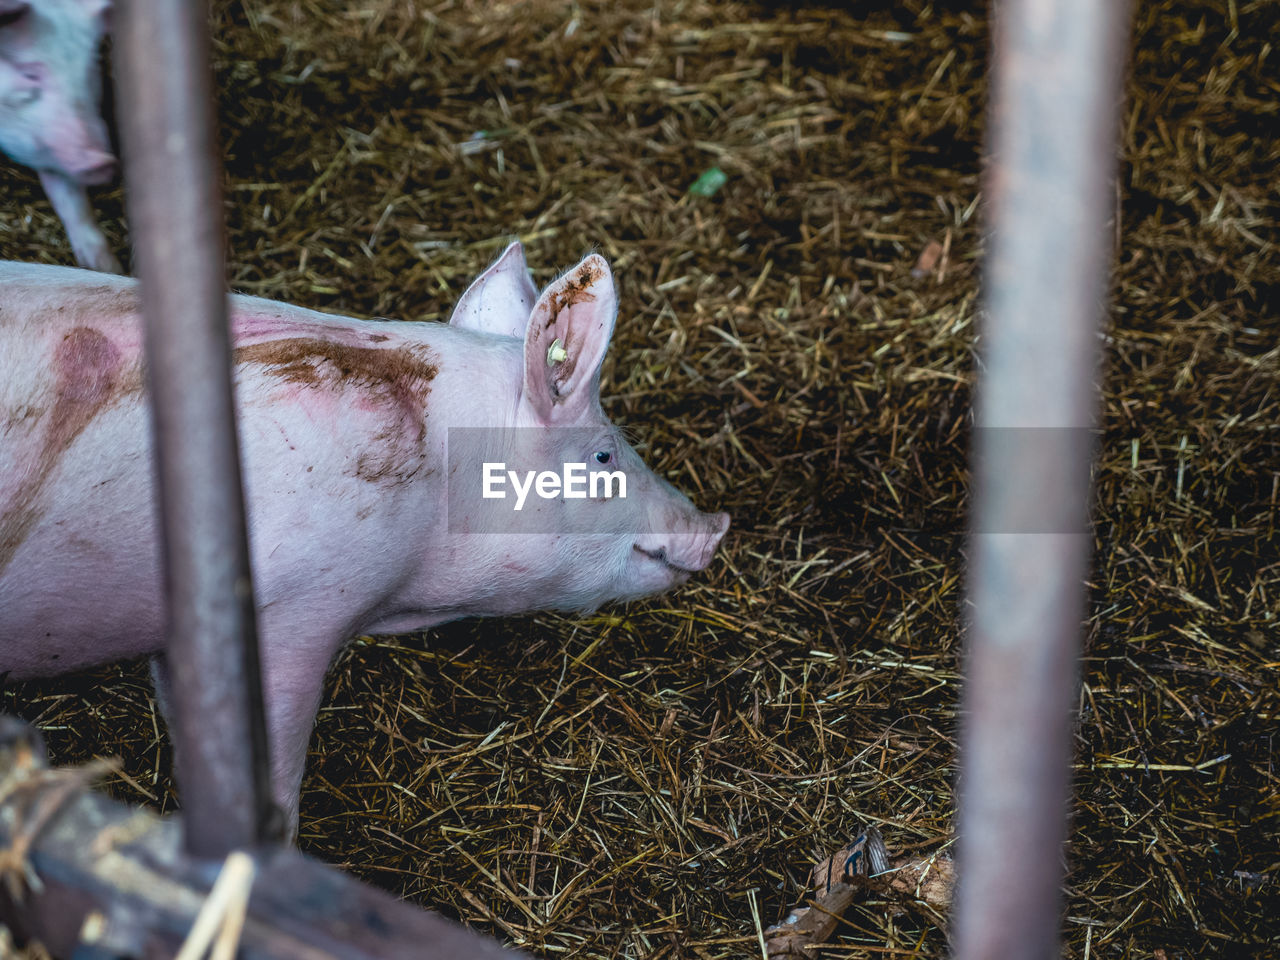 Piglet inside barn with hay. high angle view